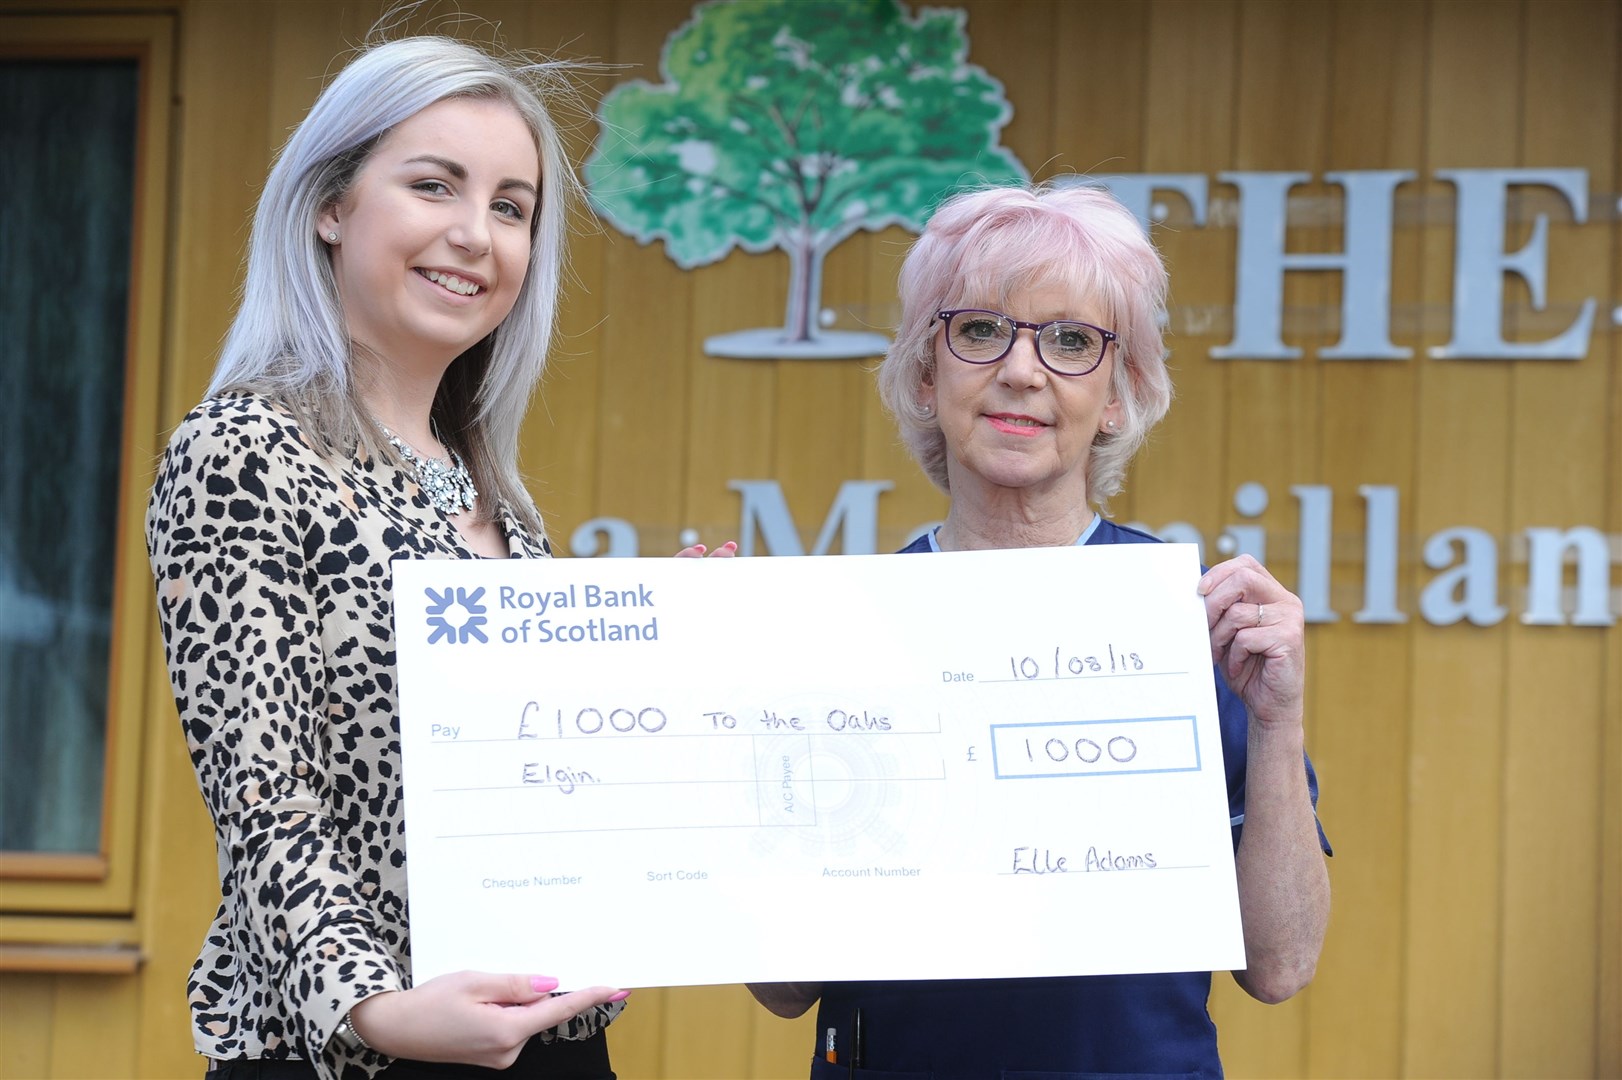 Elle adams [left] hands over a cheque for £1000 to unit manager at the oaks hospice Mhari McFadden in 2018.